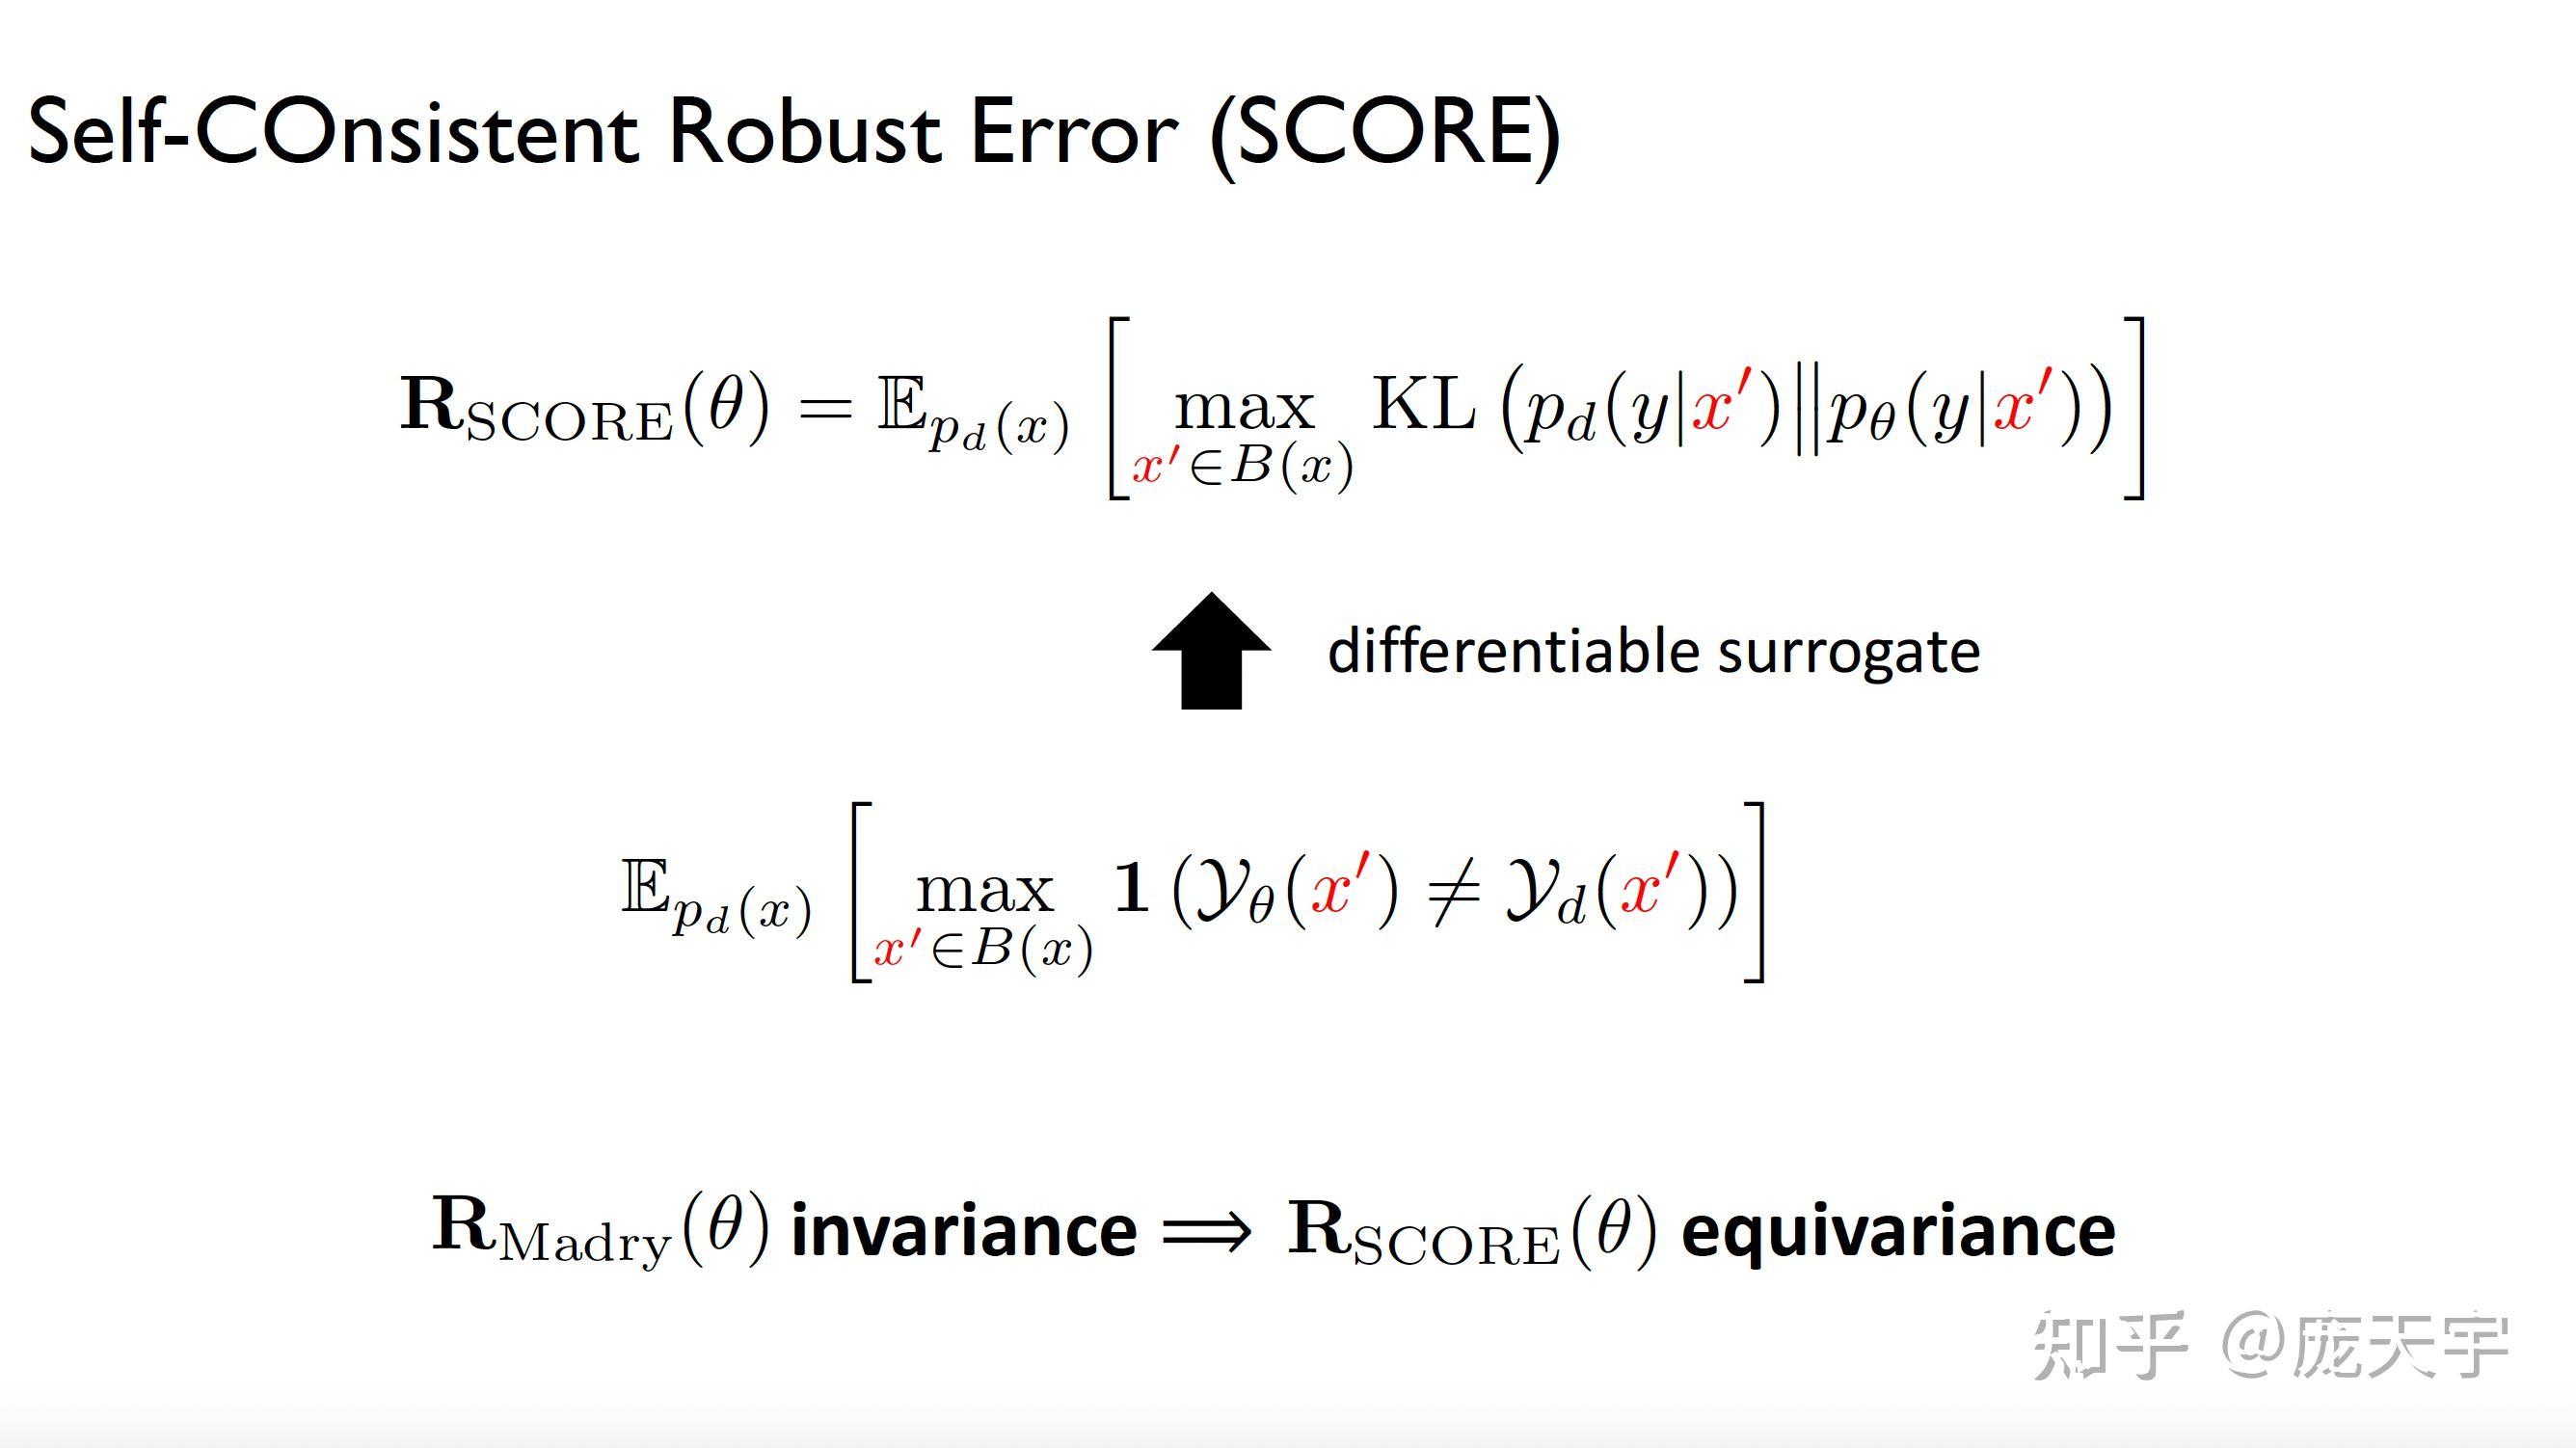 【ICML 2022】Robustness and Accuracy Could Be Reconcilable by (Proper